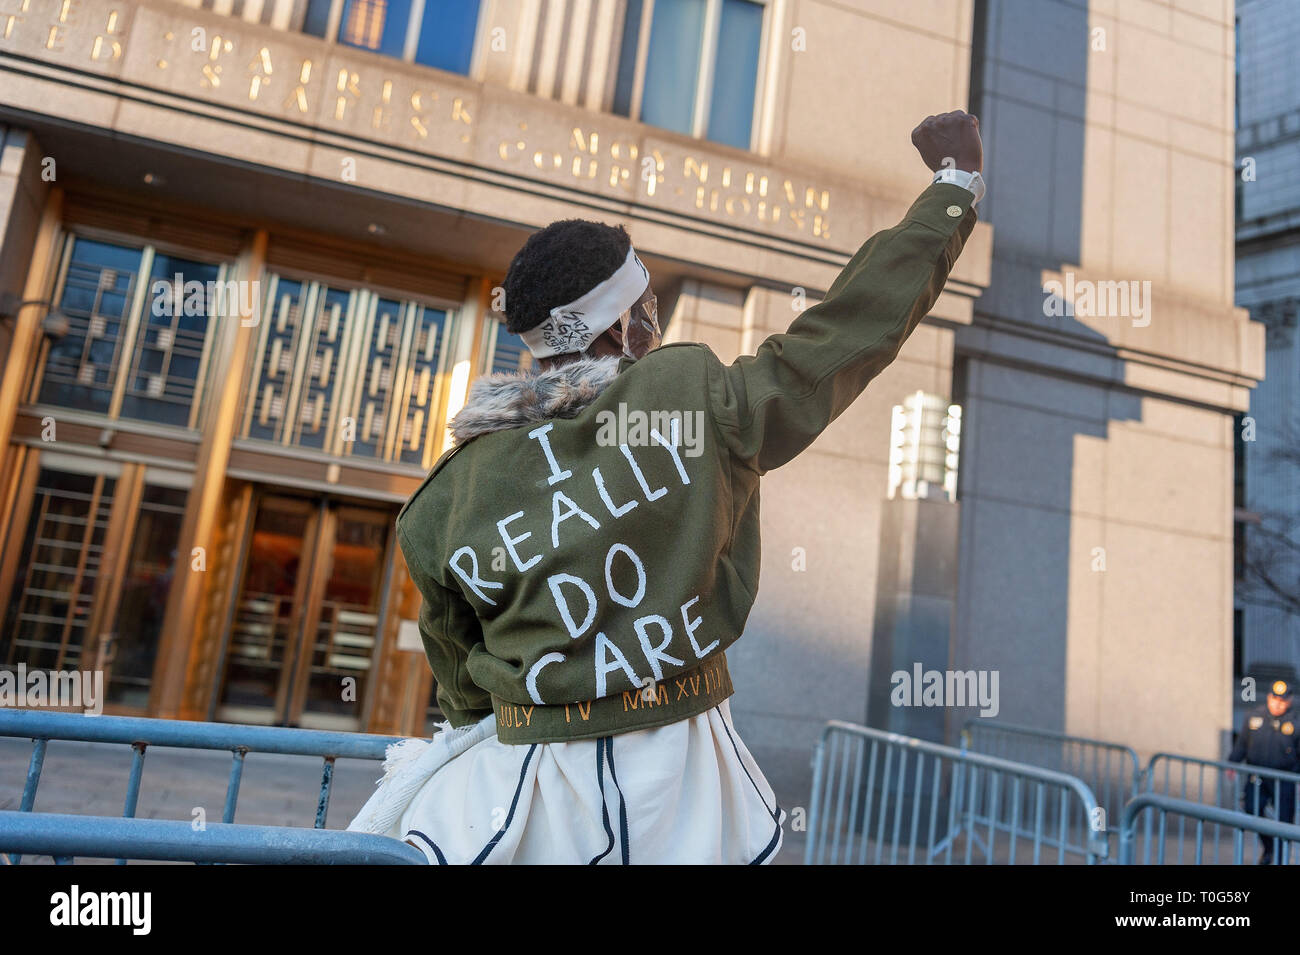 New York City, United States. 18th Mar, 2019. Today Patricia Okoumou, the activist who climbed the Statue of Liberty in July 2018 in protest of the Trump administration's zero-tolerance immigration policies was sentenced in the Southern District Court of New York In Manhattan to 5 years of probation. Before the sentencing, supporters gathered in a show of support alongside Ms. Okoumou who had covered her face in plastic tape to protest the limits imposed on her freedom of expression. Credit: Gabriele Holtermann Gorden/Pacific Press/Alamy Live News Stock Photo